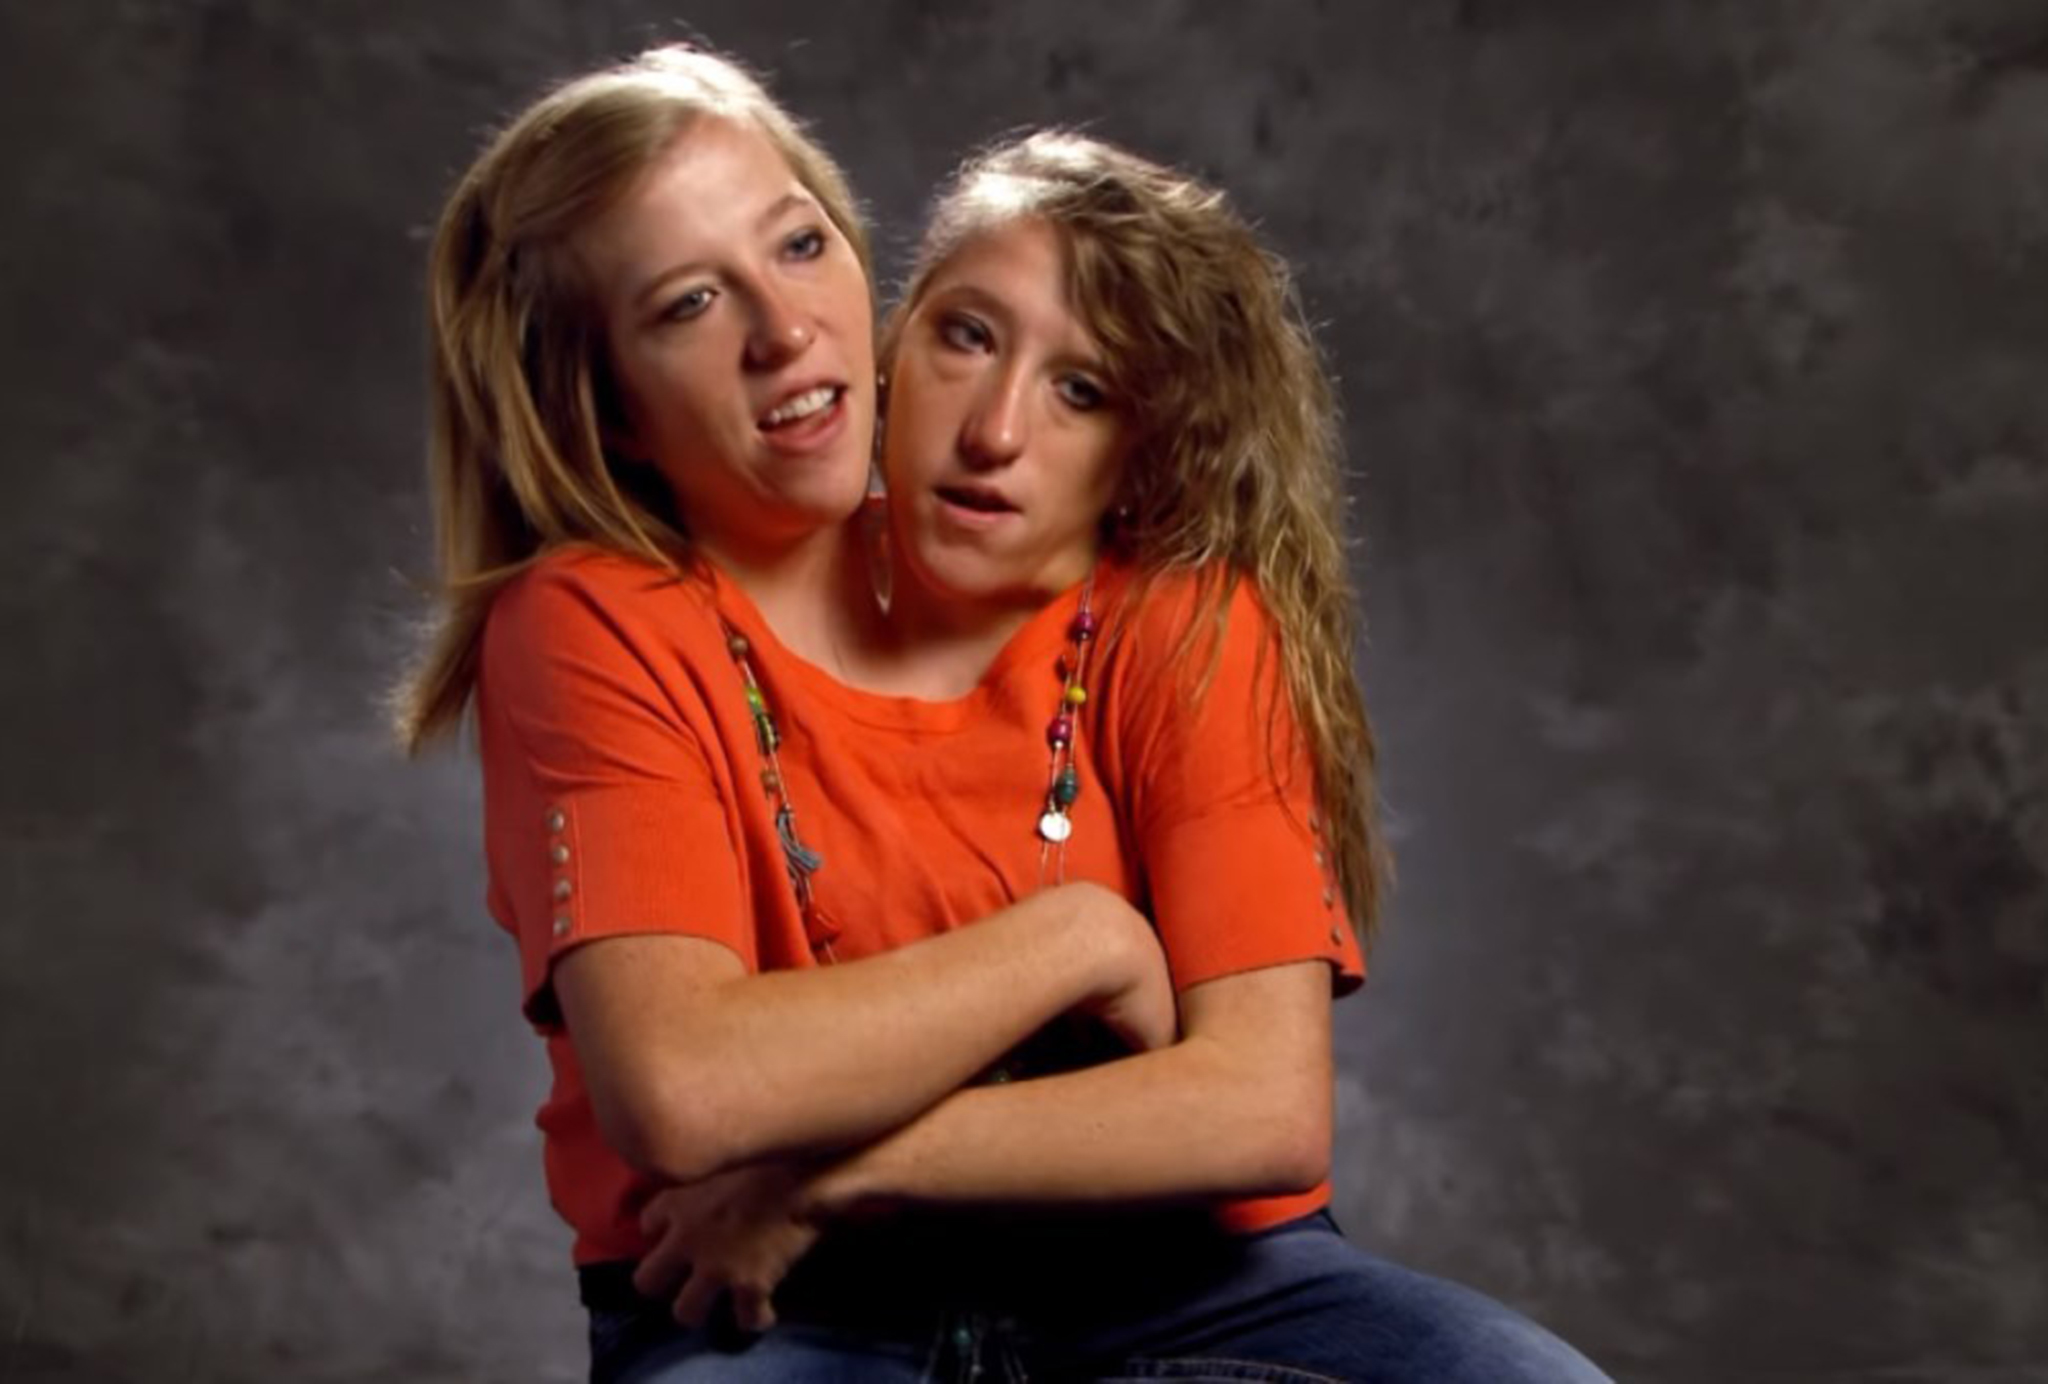 What Conjoined Twins Abby And Brittany Hensel Look Like Today In 2020